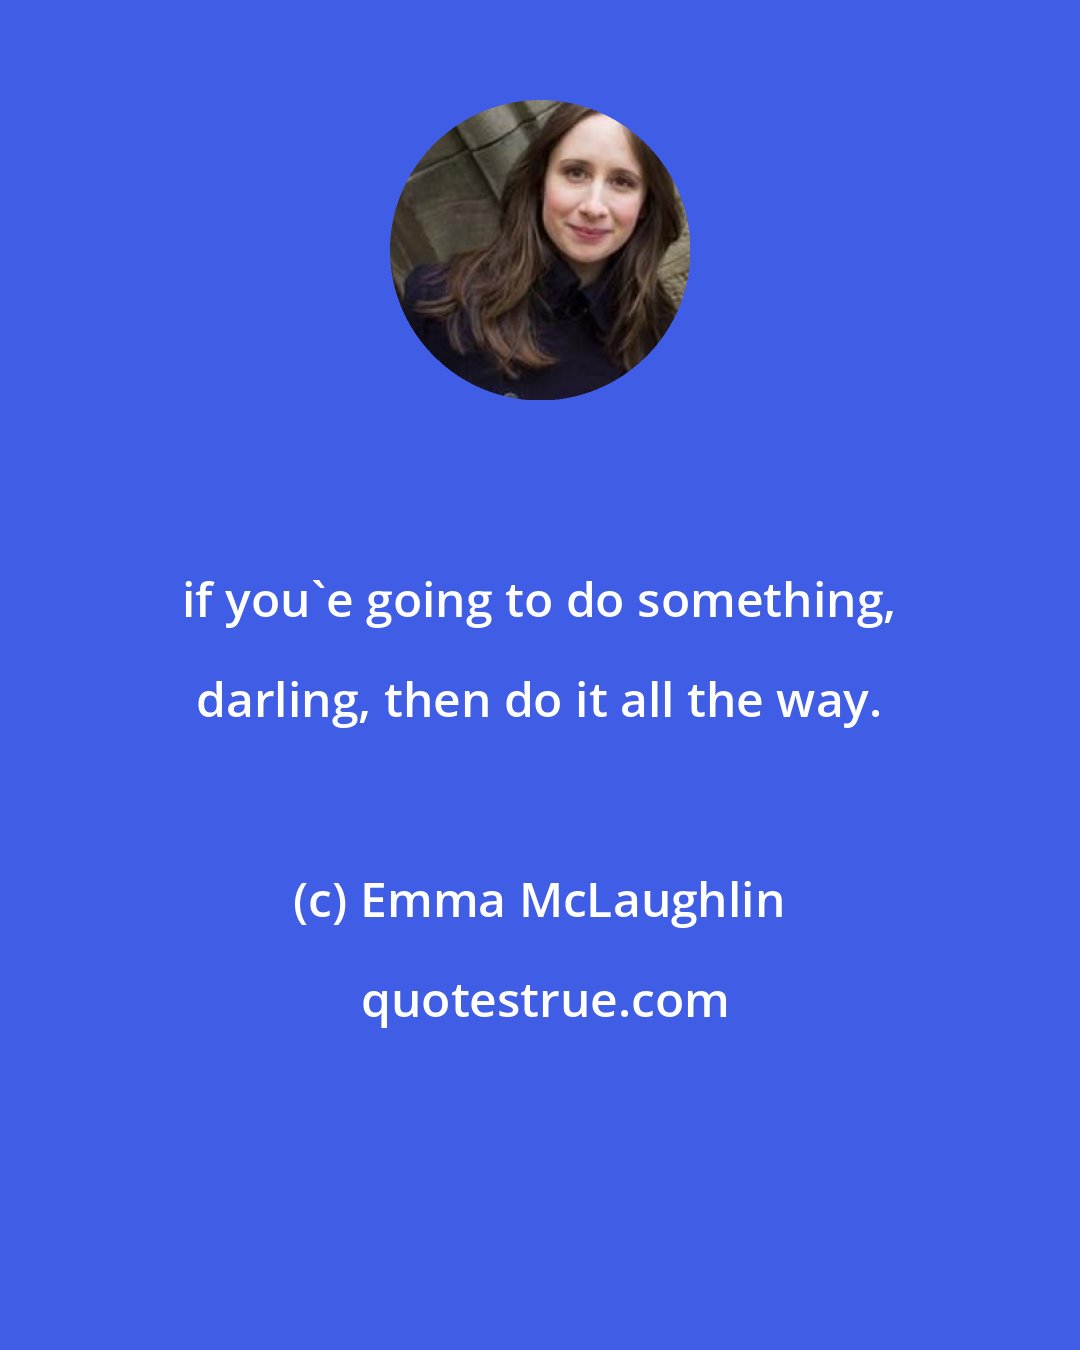 Emma McLaughlin: if you'e going to do something, darling, then do it all the way.